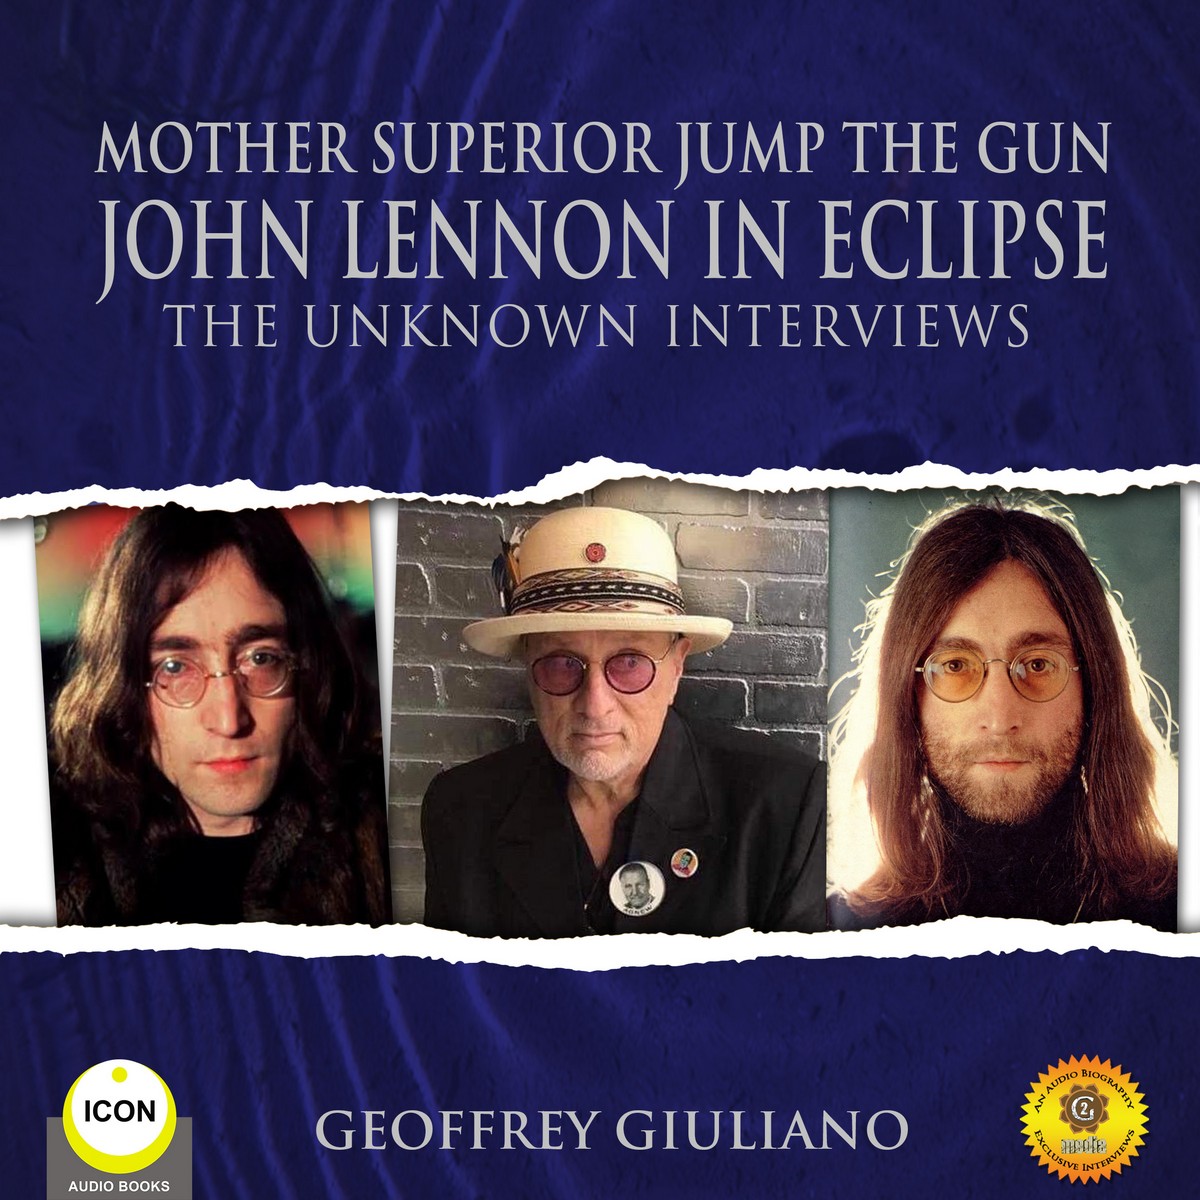 Mother Superior Jump The Gun John Lennon in Eclipse – The Unknown Interviews